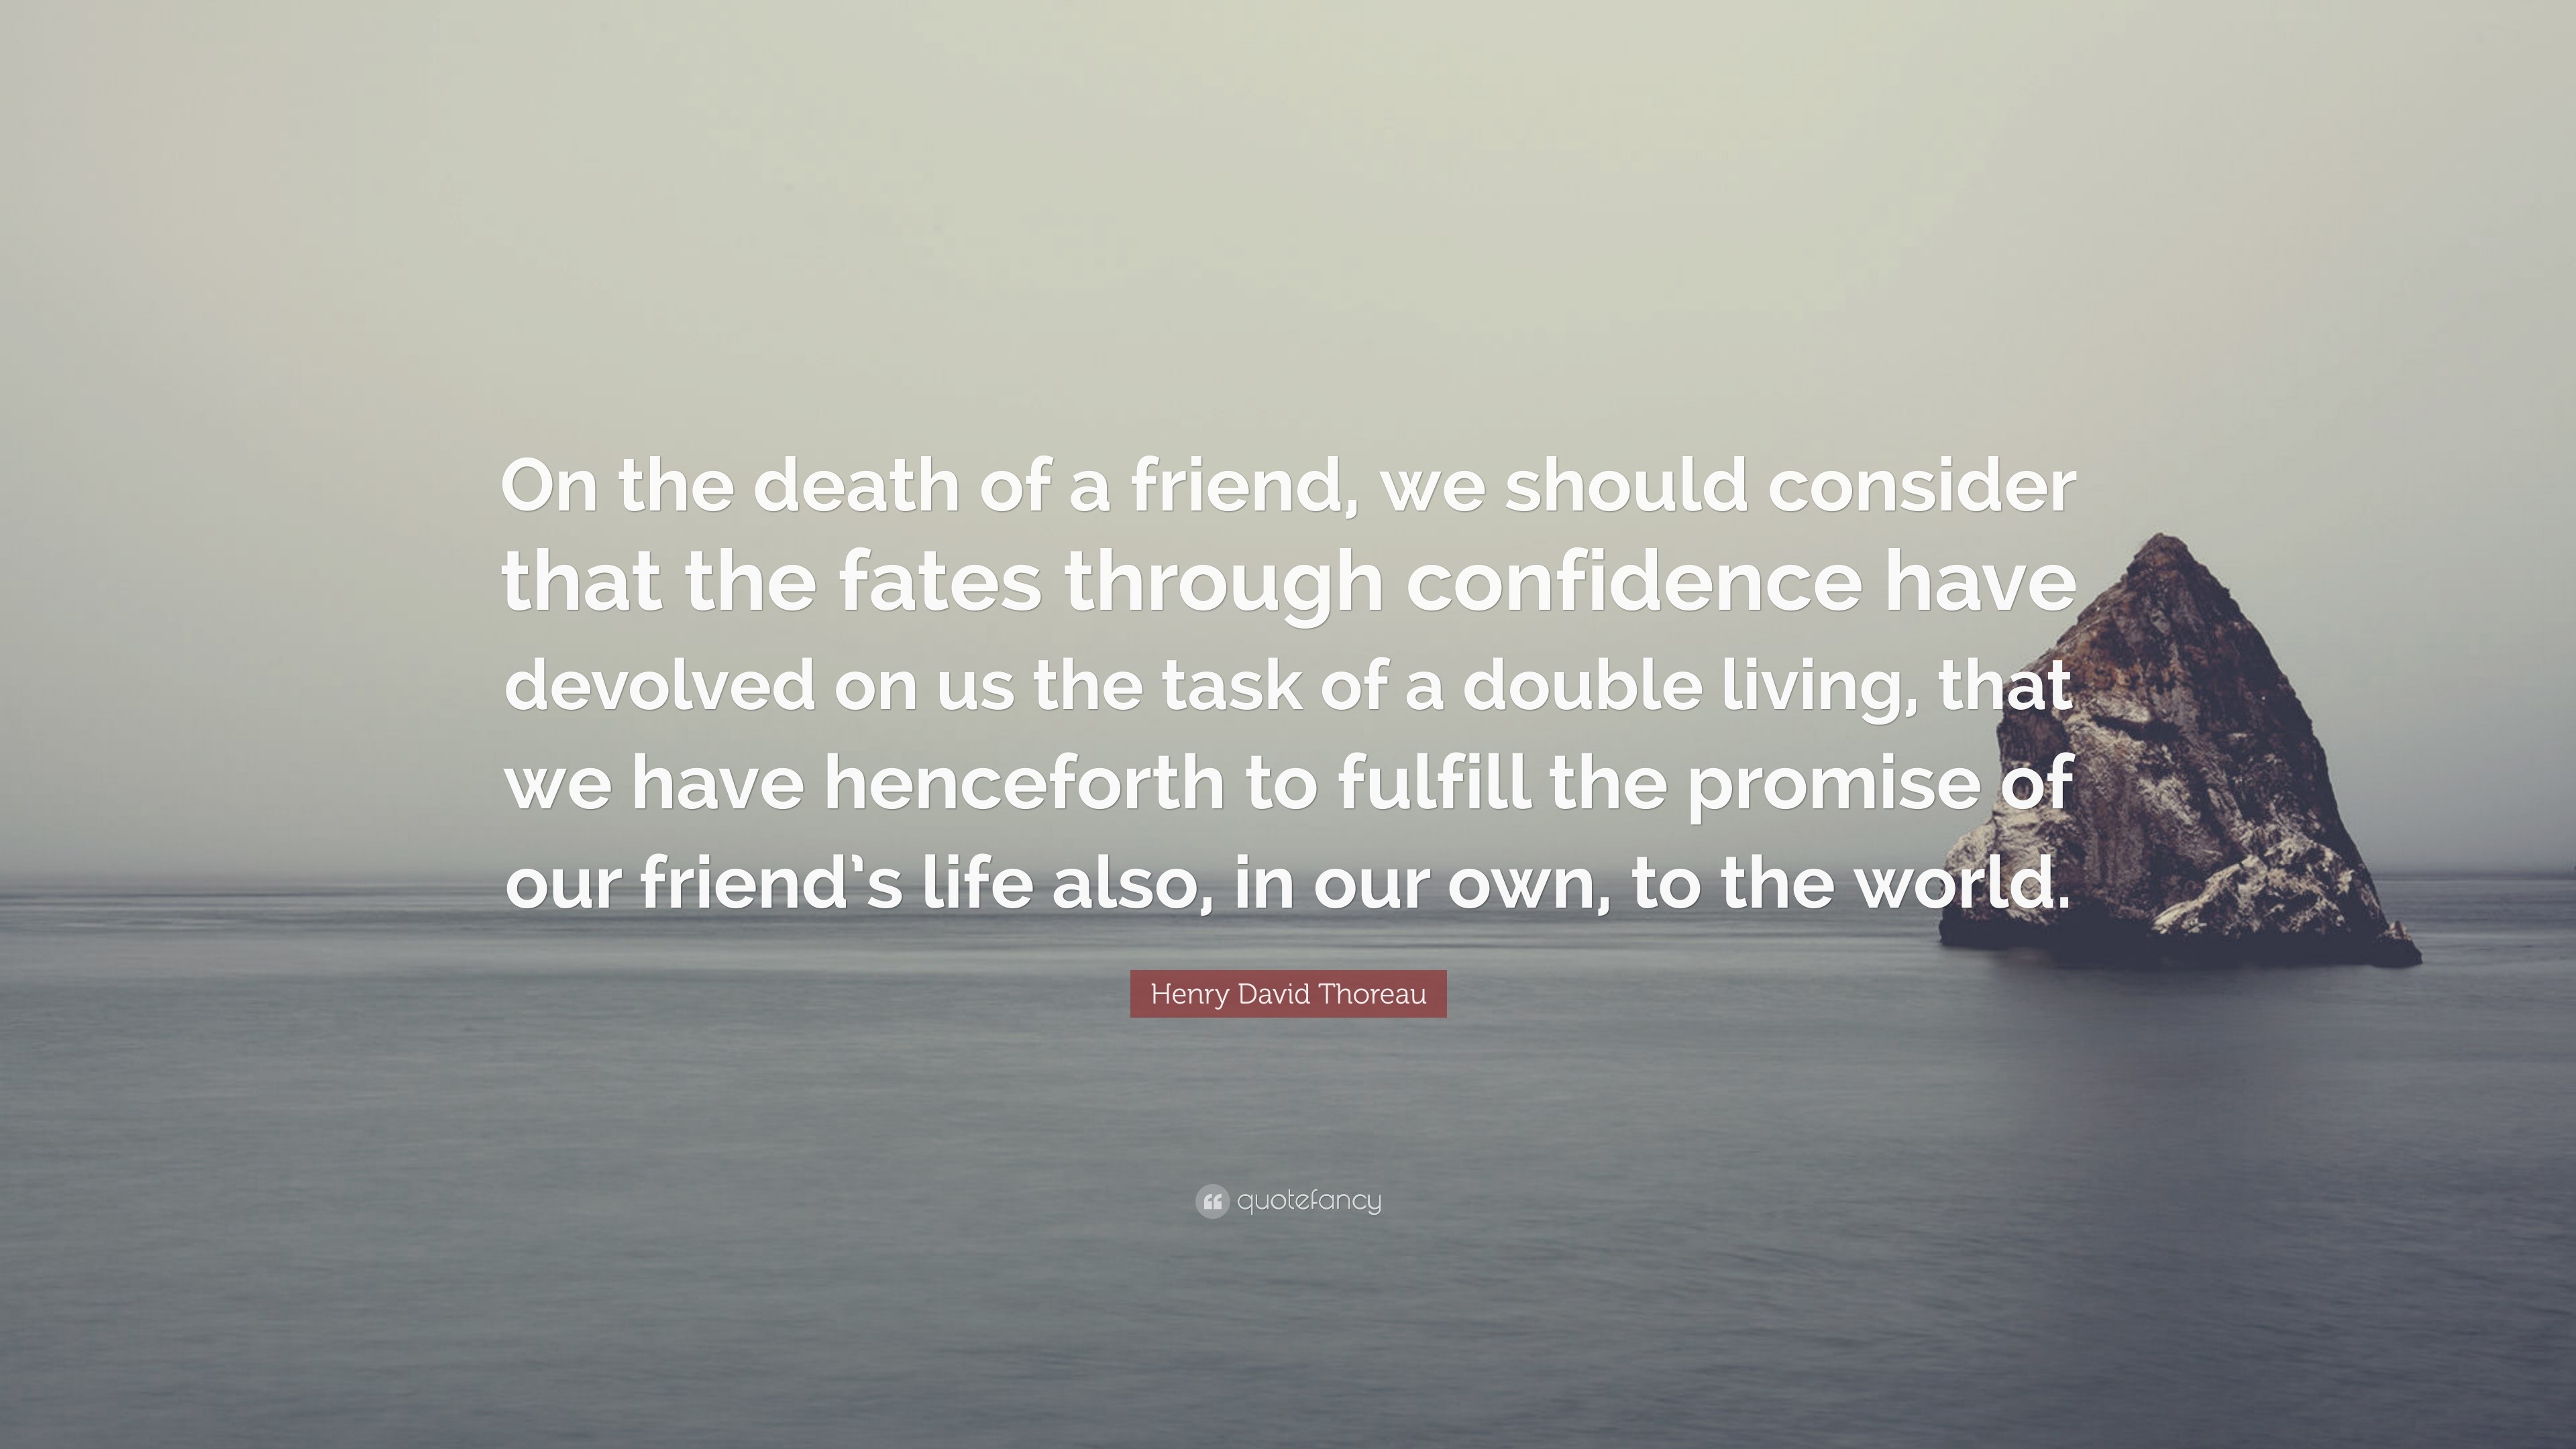 Henry David Thoreau Quote “On the death of a friend, we